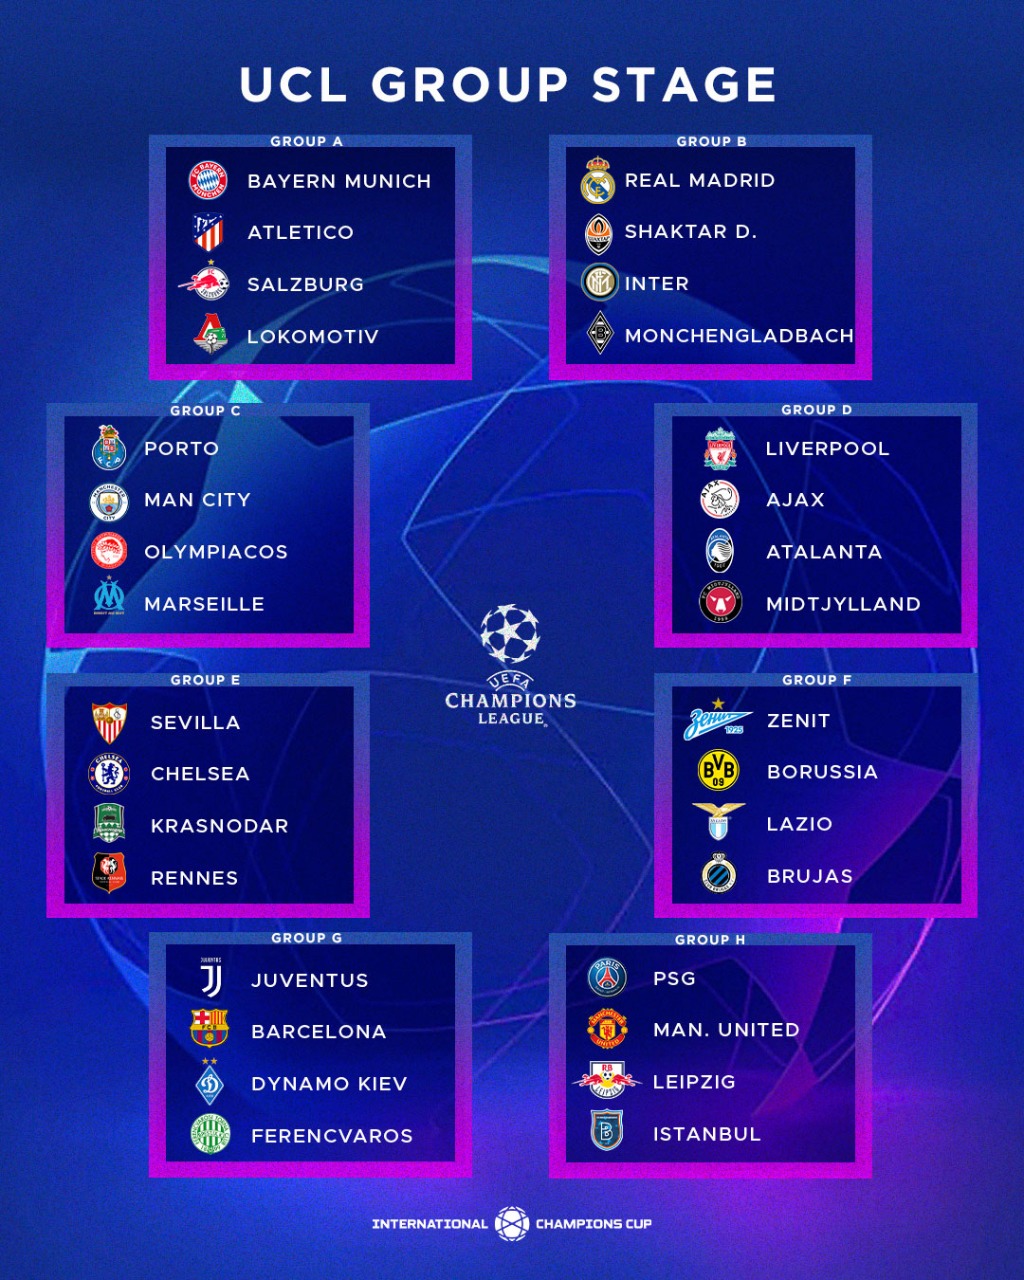 International Champions Cup on "Here is your UEFA Champions League group stage draw 🏆 What's most competitive group? https://t.co/9Svp8ESfuK" / Twitter